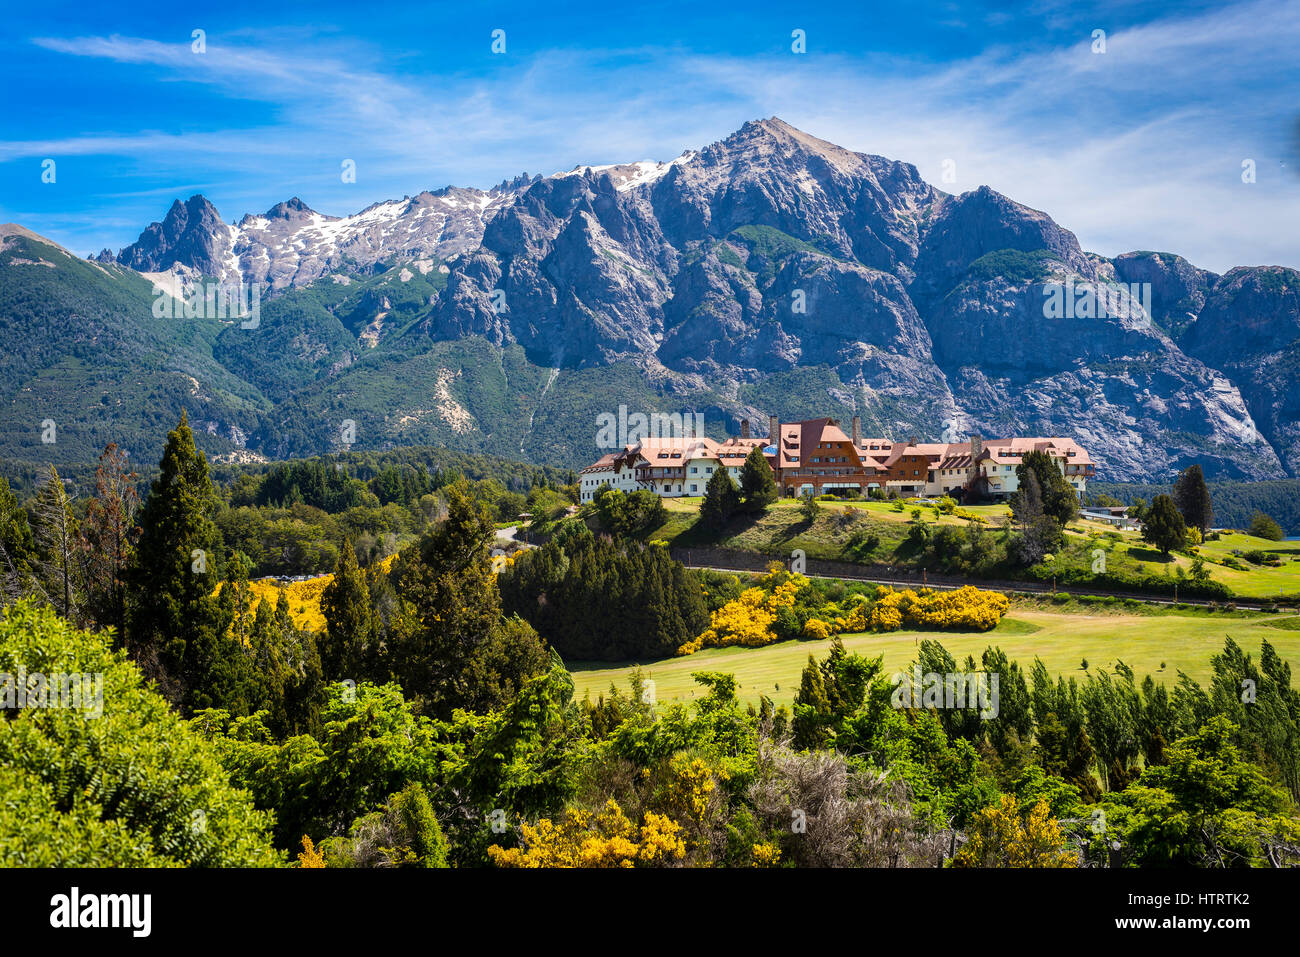 Llao llao hotel in Bariloche, Patagonia. One of the most expensive in the region. Stock Photo